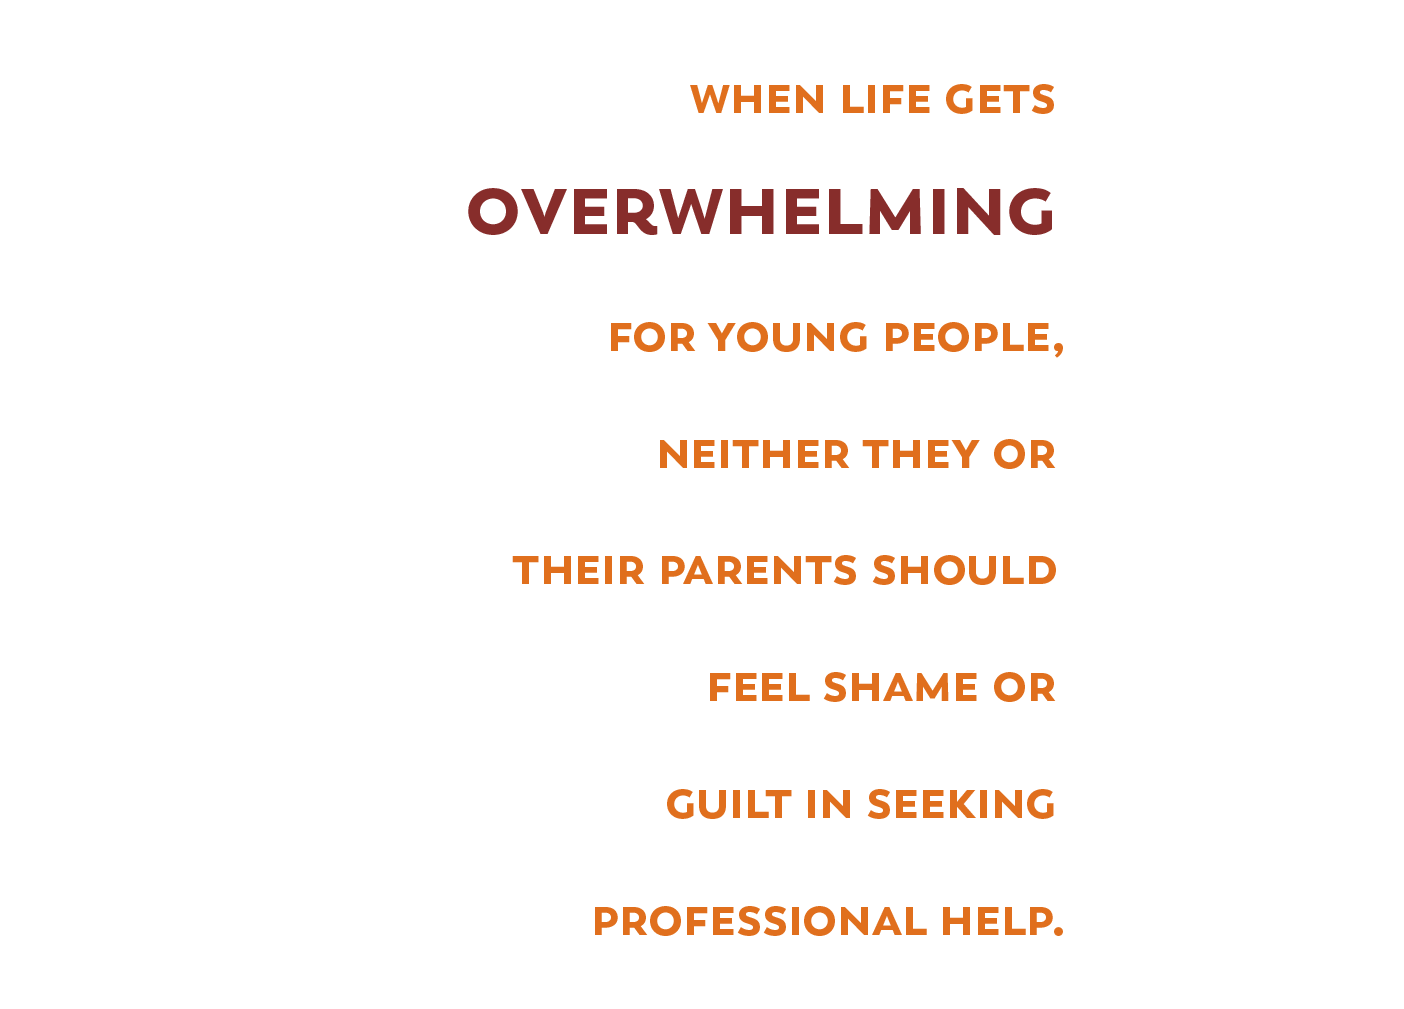 Pull Quote: "When life gets overwhelming for youn gpeople, neither they or their parents should feel shame or guilt in seeking professional help."